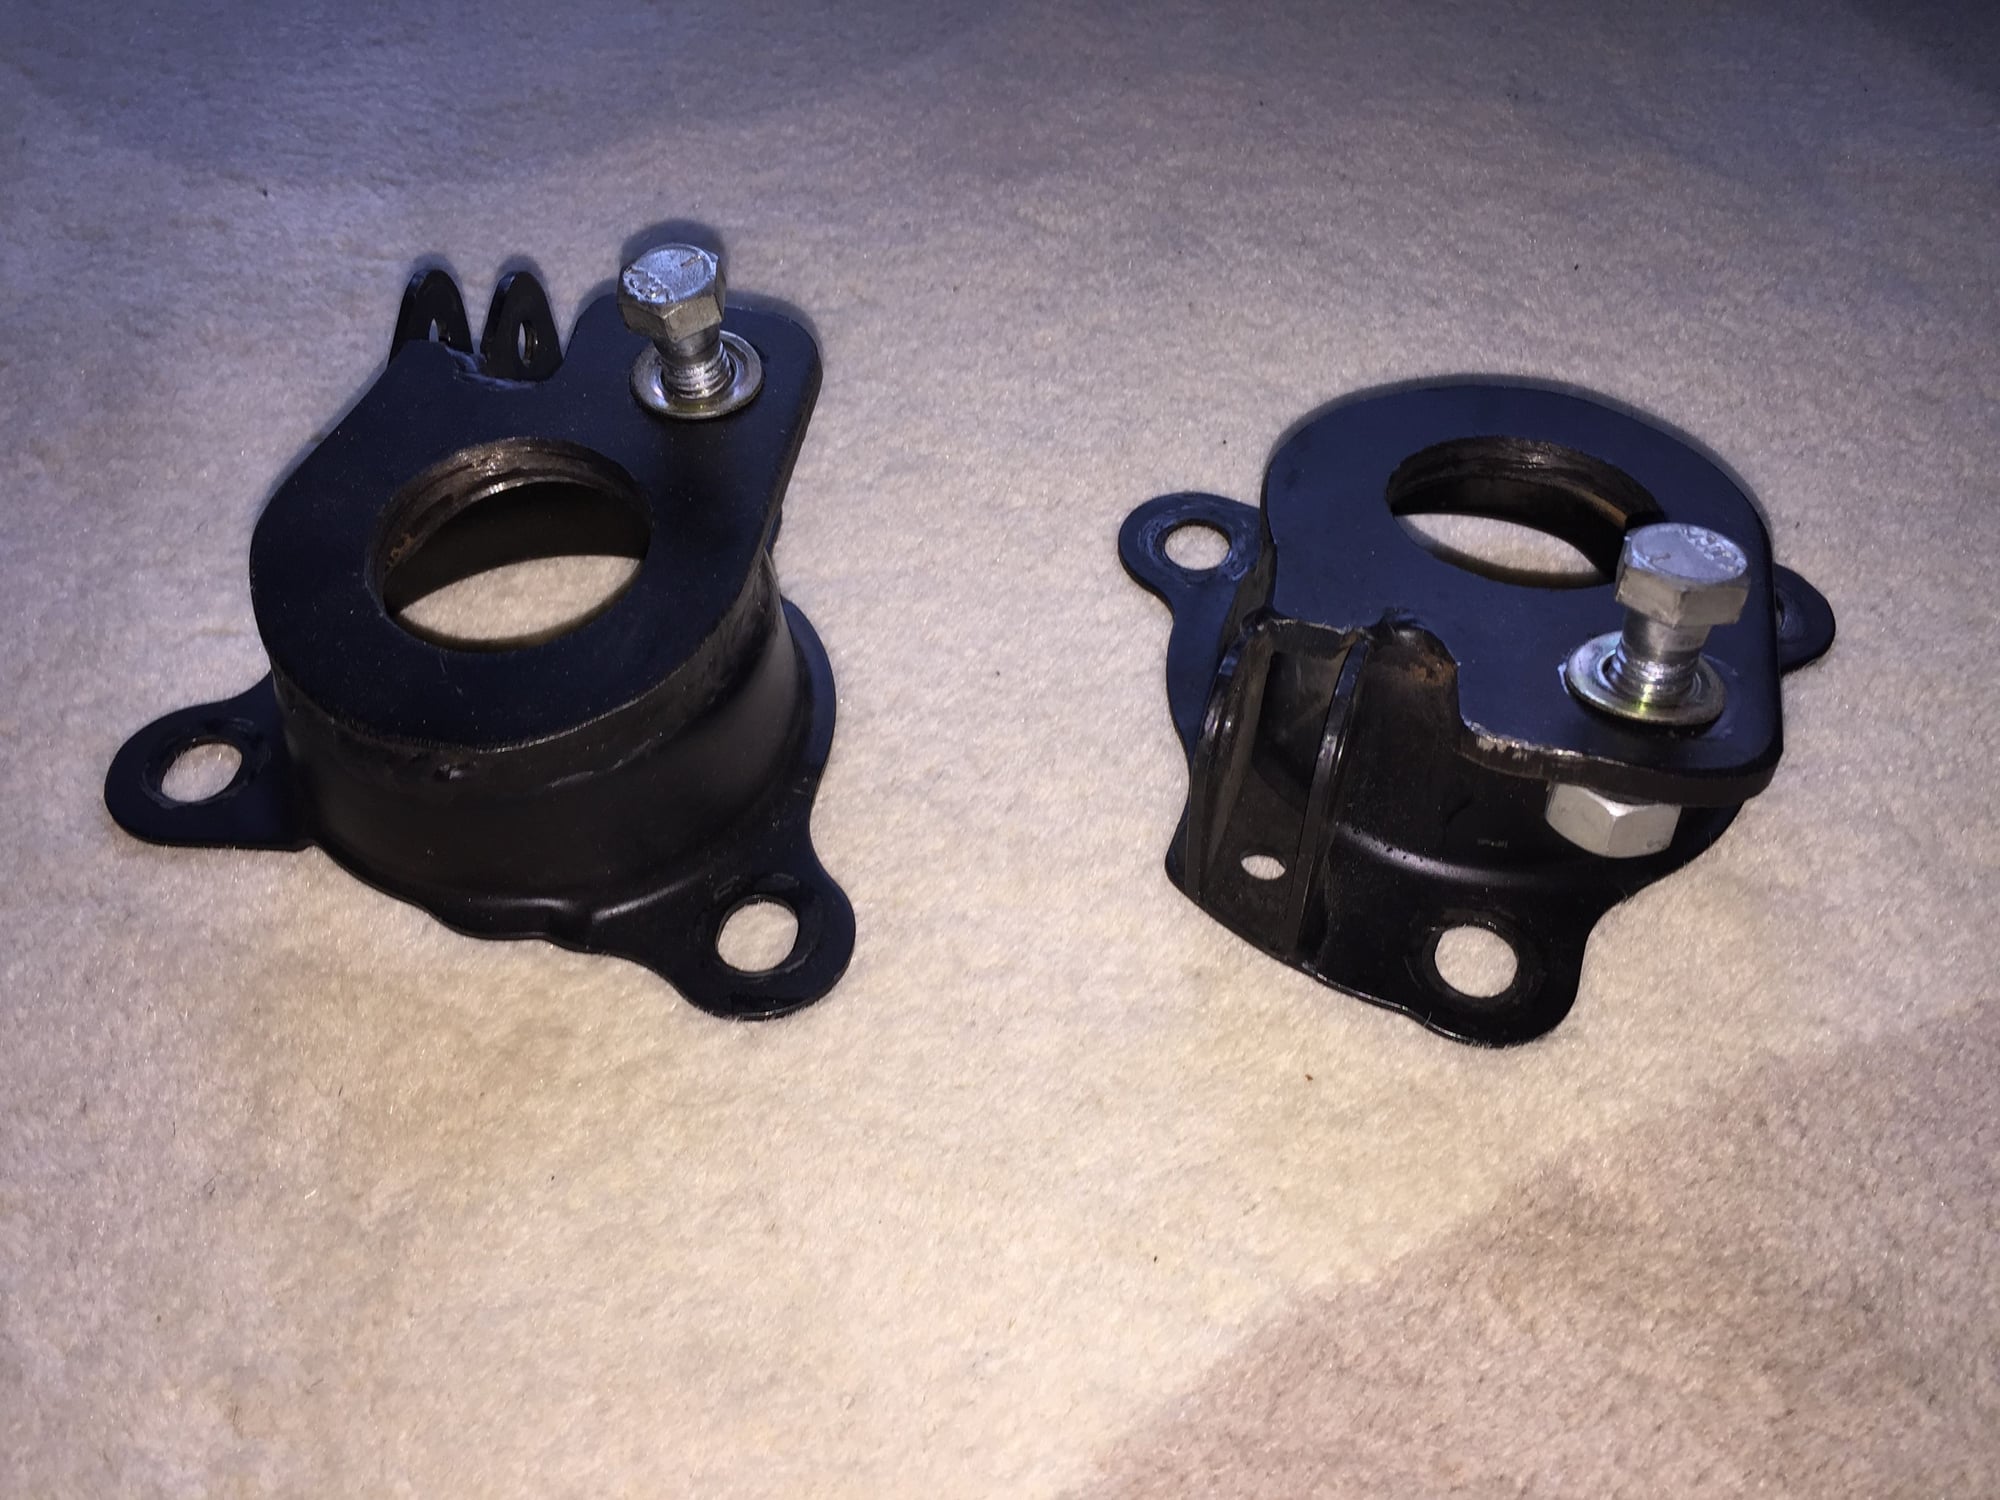 Steering/Suspension - Rear Struct Brackets modified to support harness and exemplar harness - Used - 1993 to 2001 Mazda RX-7 - Menlo Park, CA 94025, United States